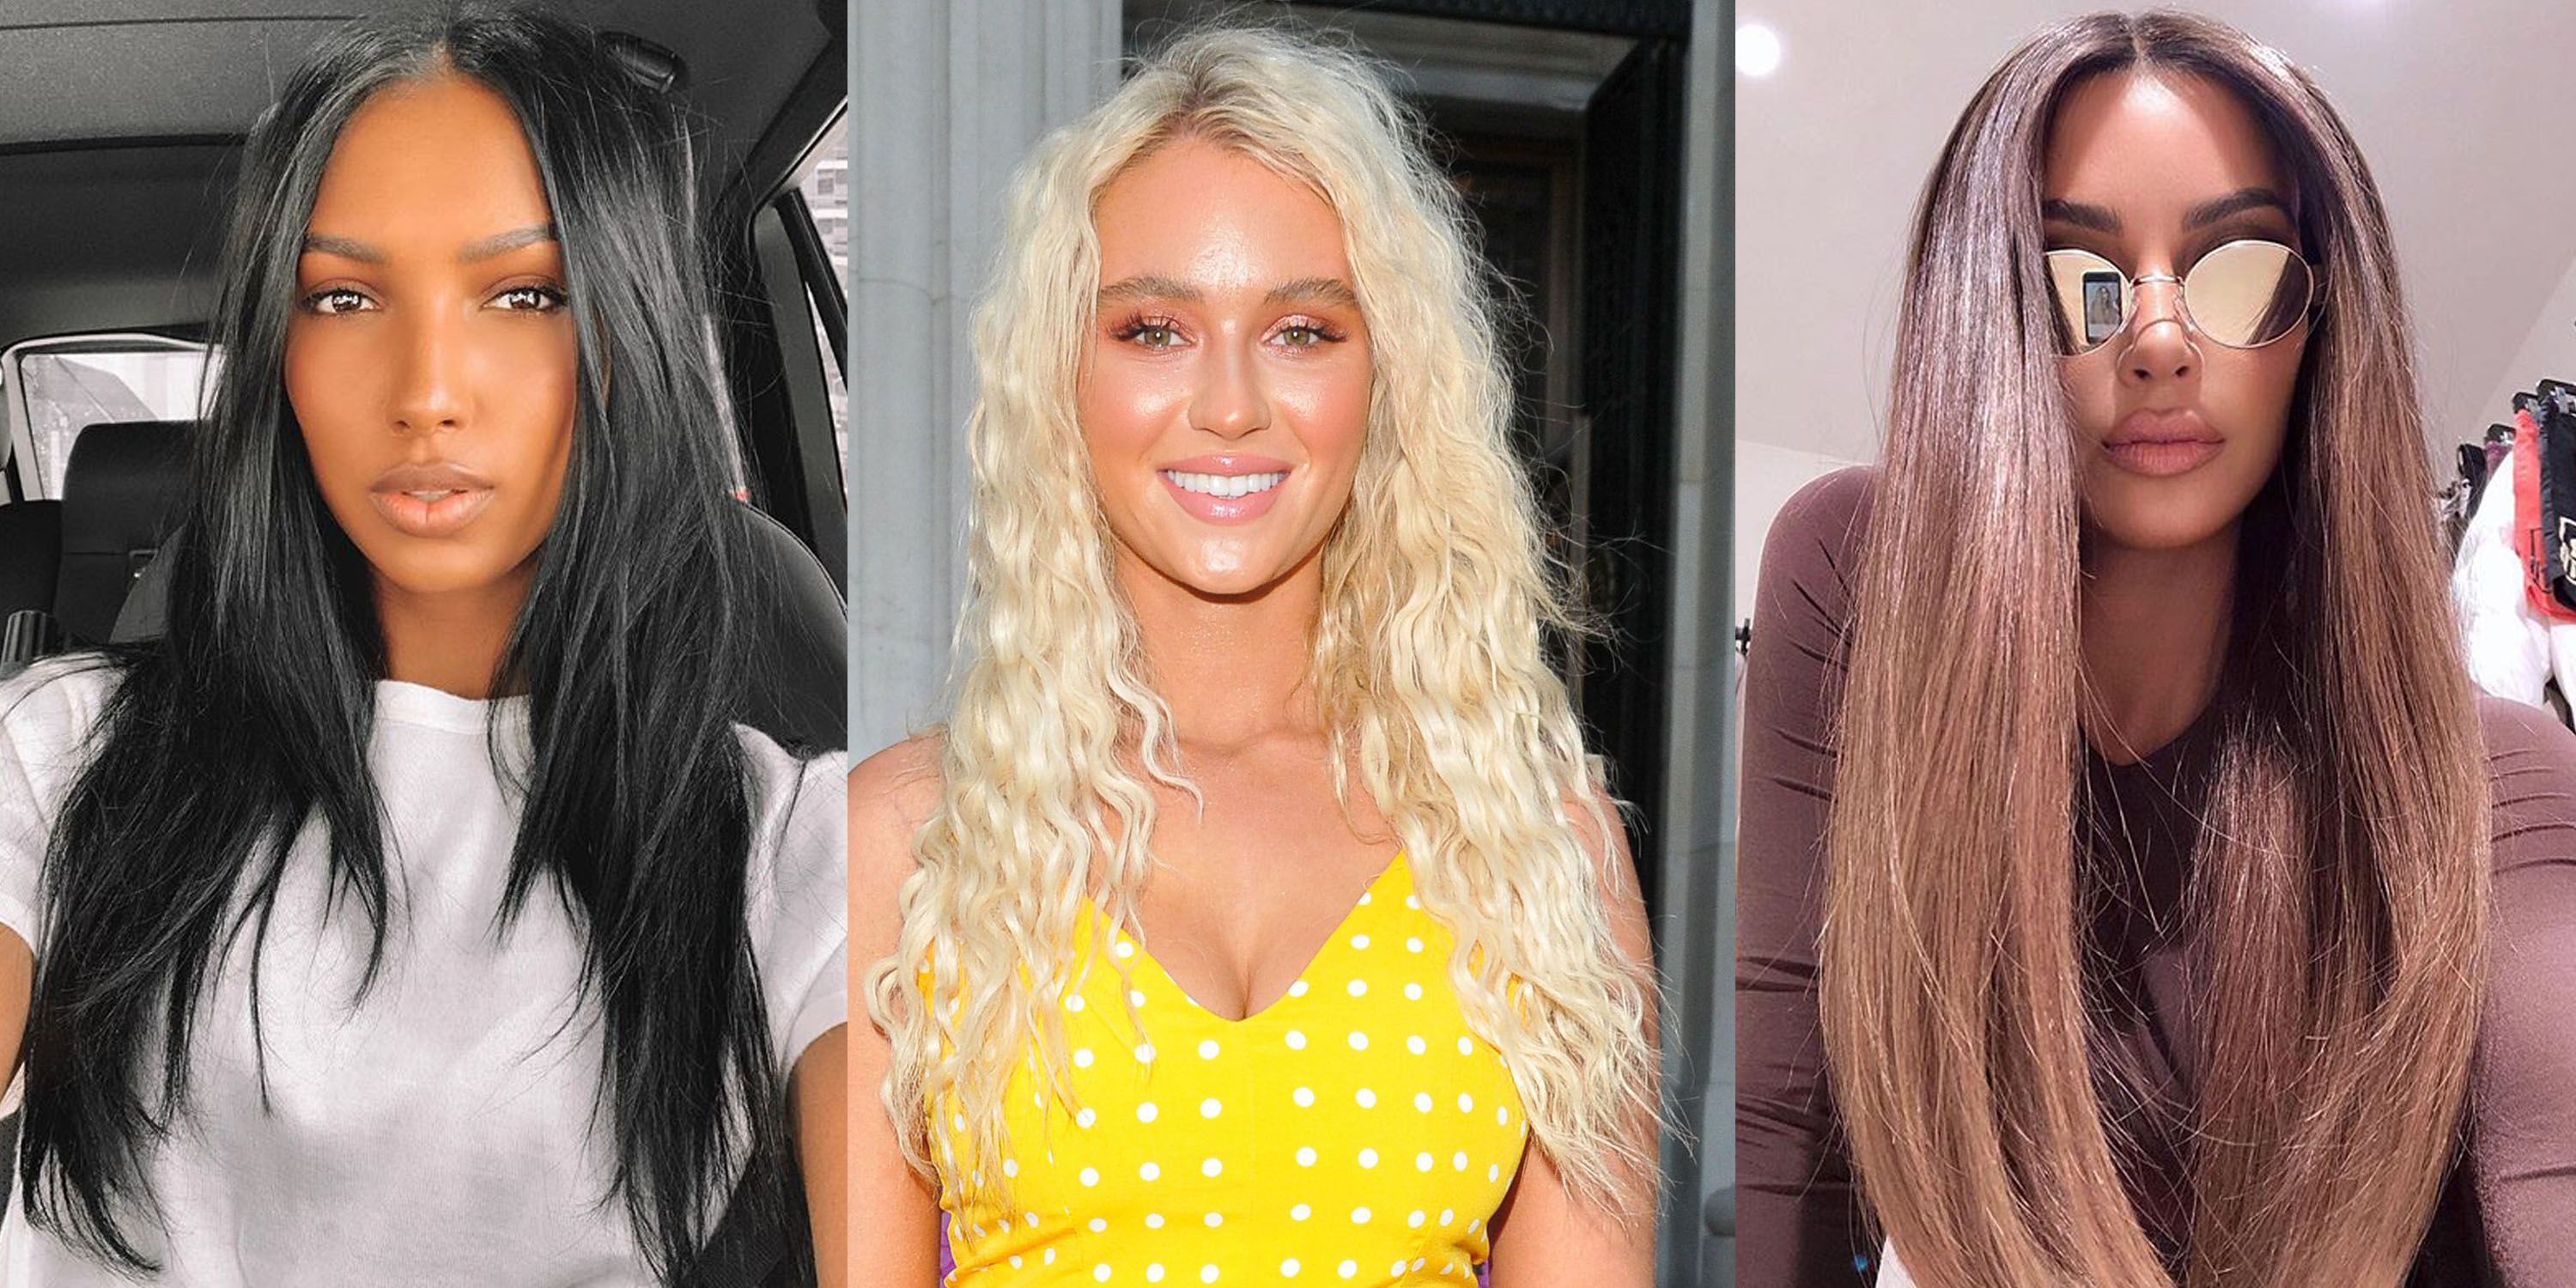 Long hairstyles for 2021 - ALL the long hair inspiration you need